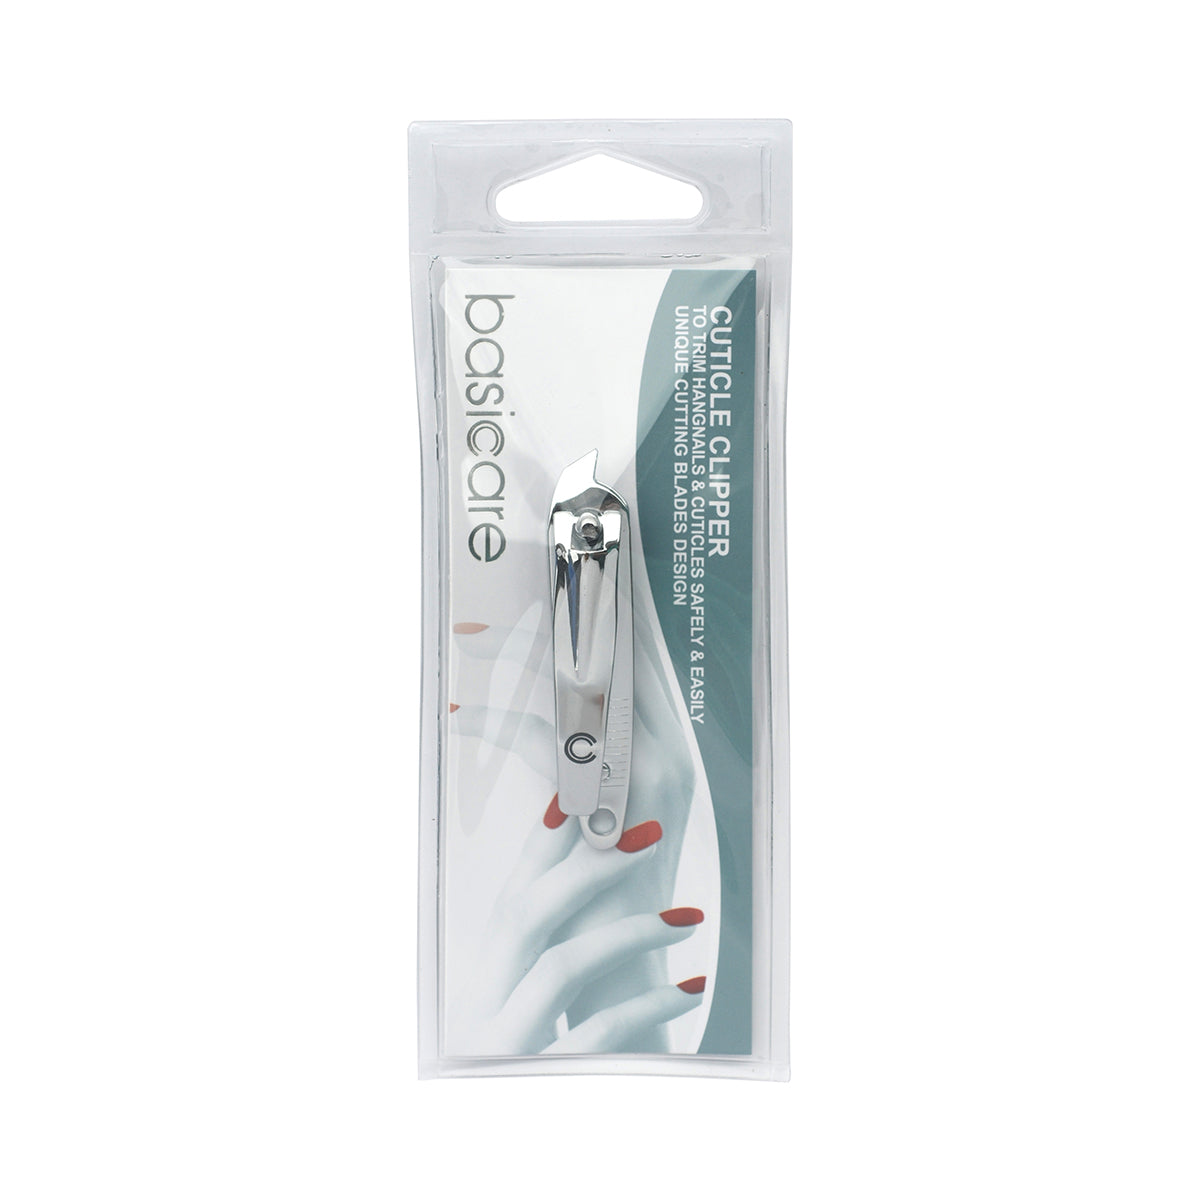 Basicare Stainless Steel Cuticle Clipper (7616125501664)